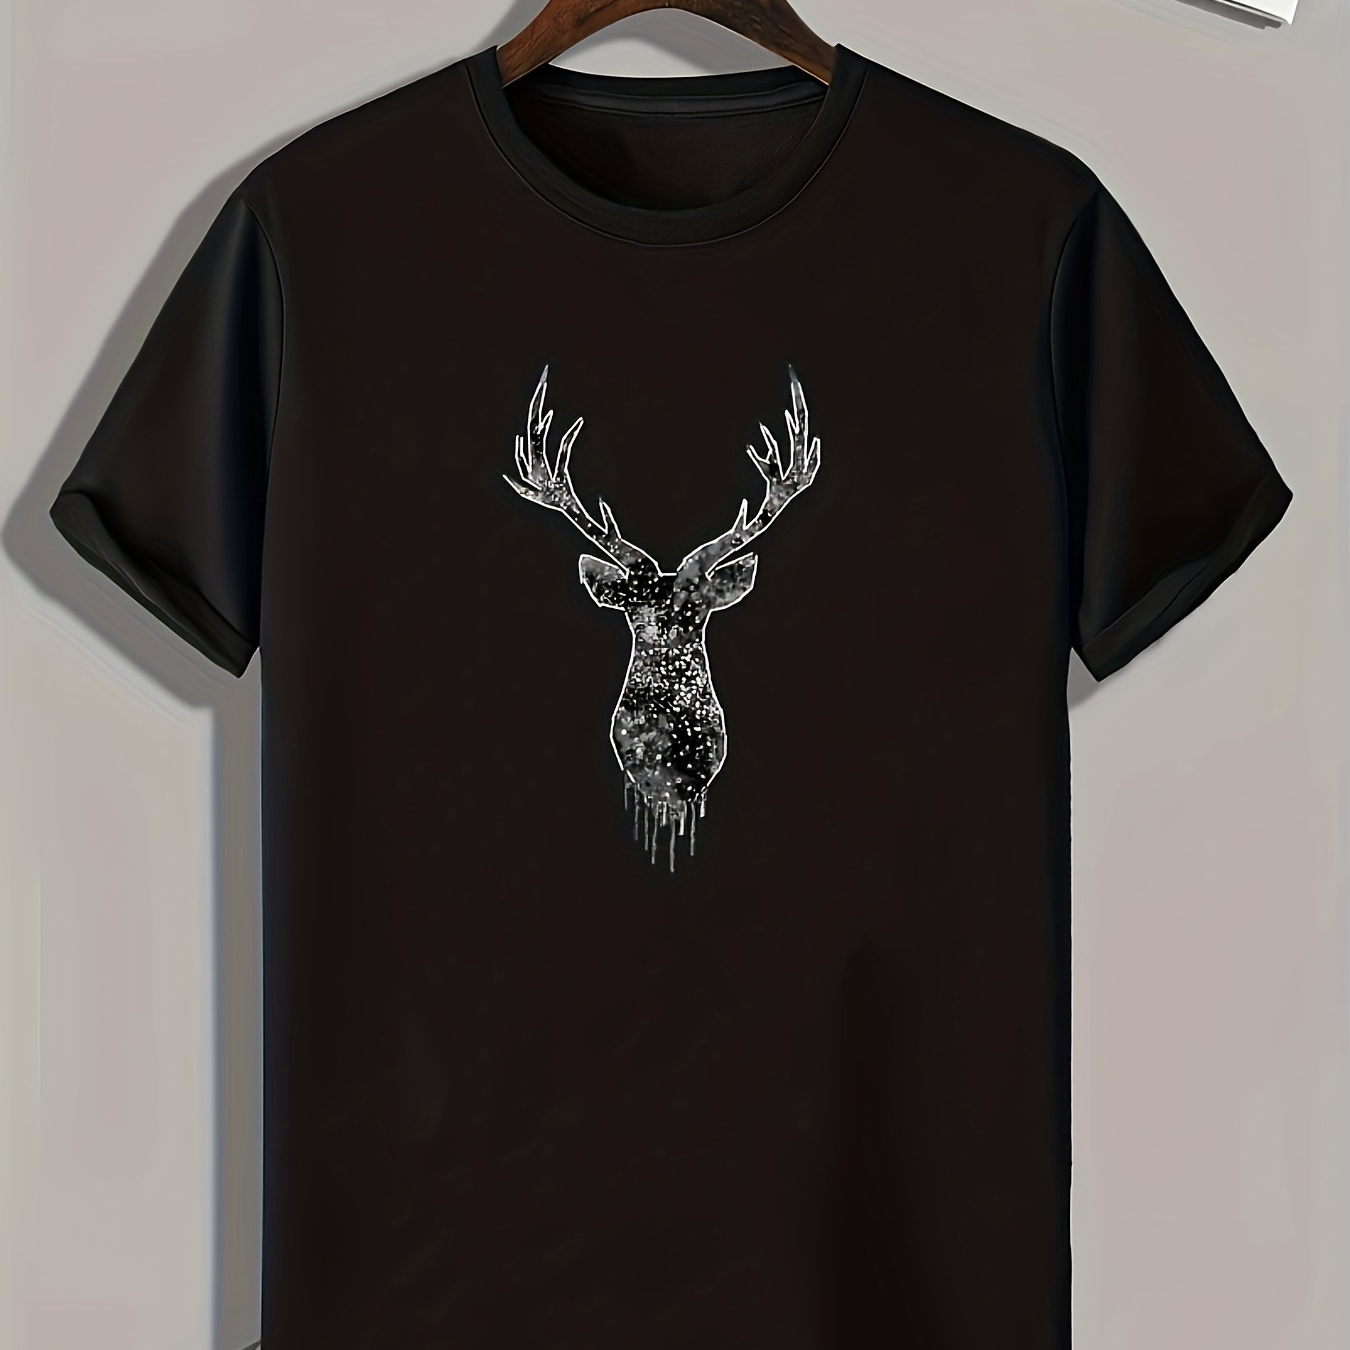 

Deer Horn Print, Men's Graphic T-shirt, Casual Comfy Tees For Summer, Mens Clothing